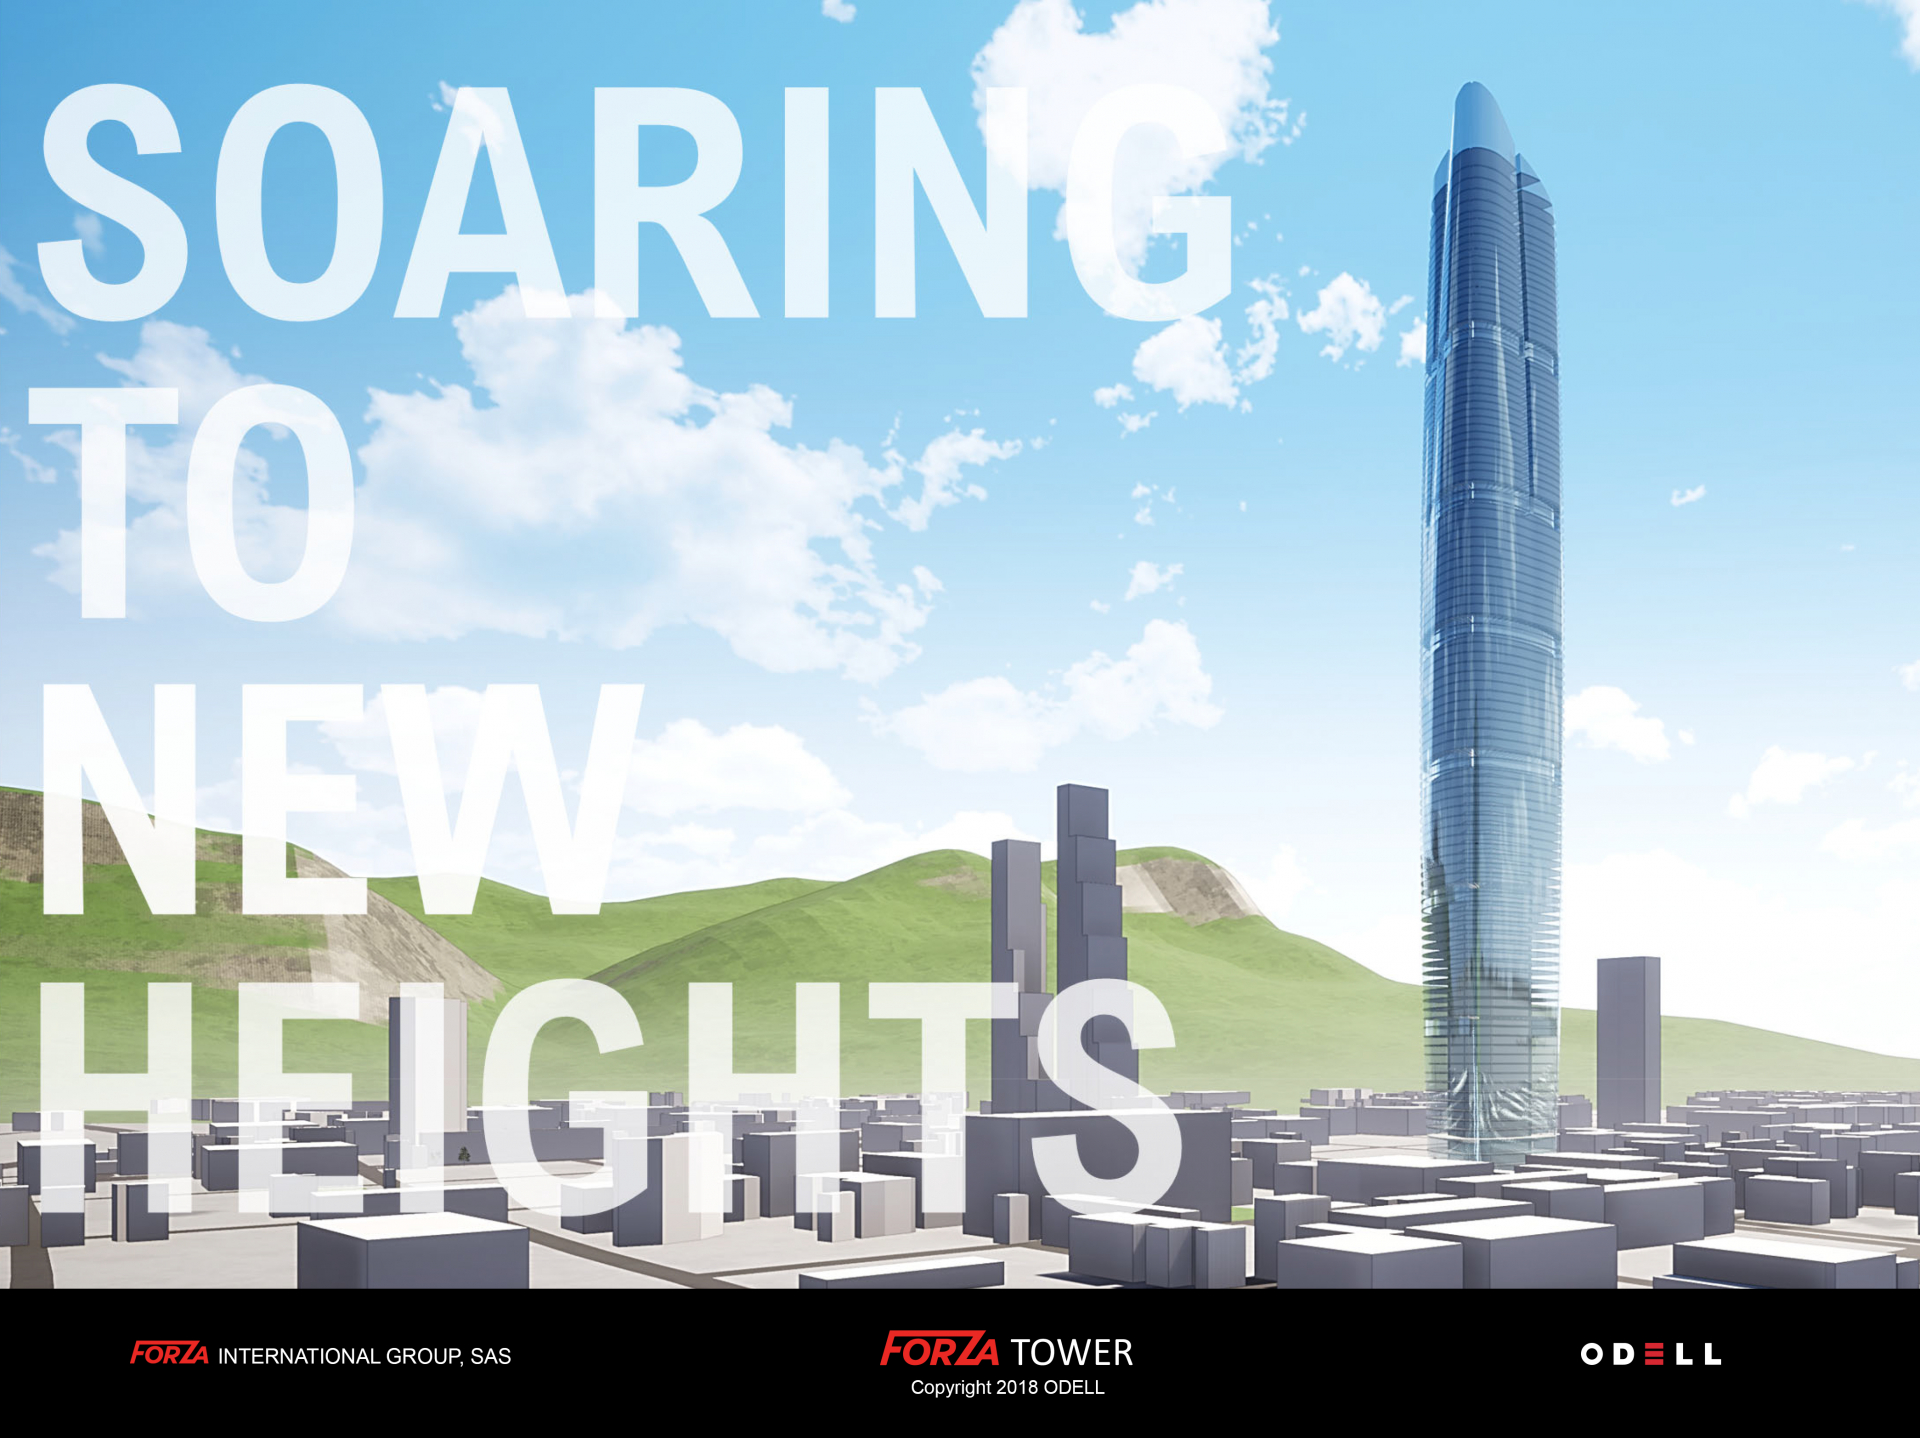 Forza Tower_Soaring Image